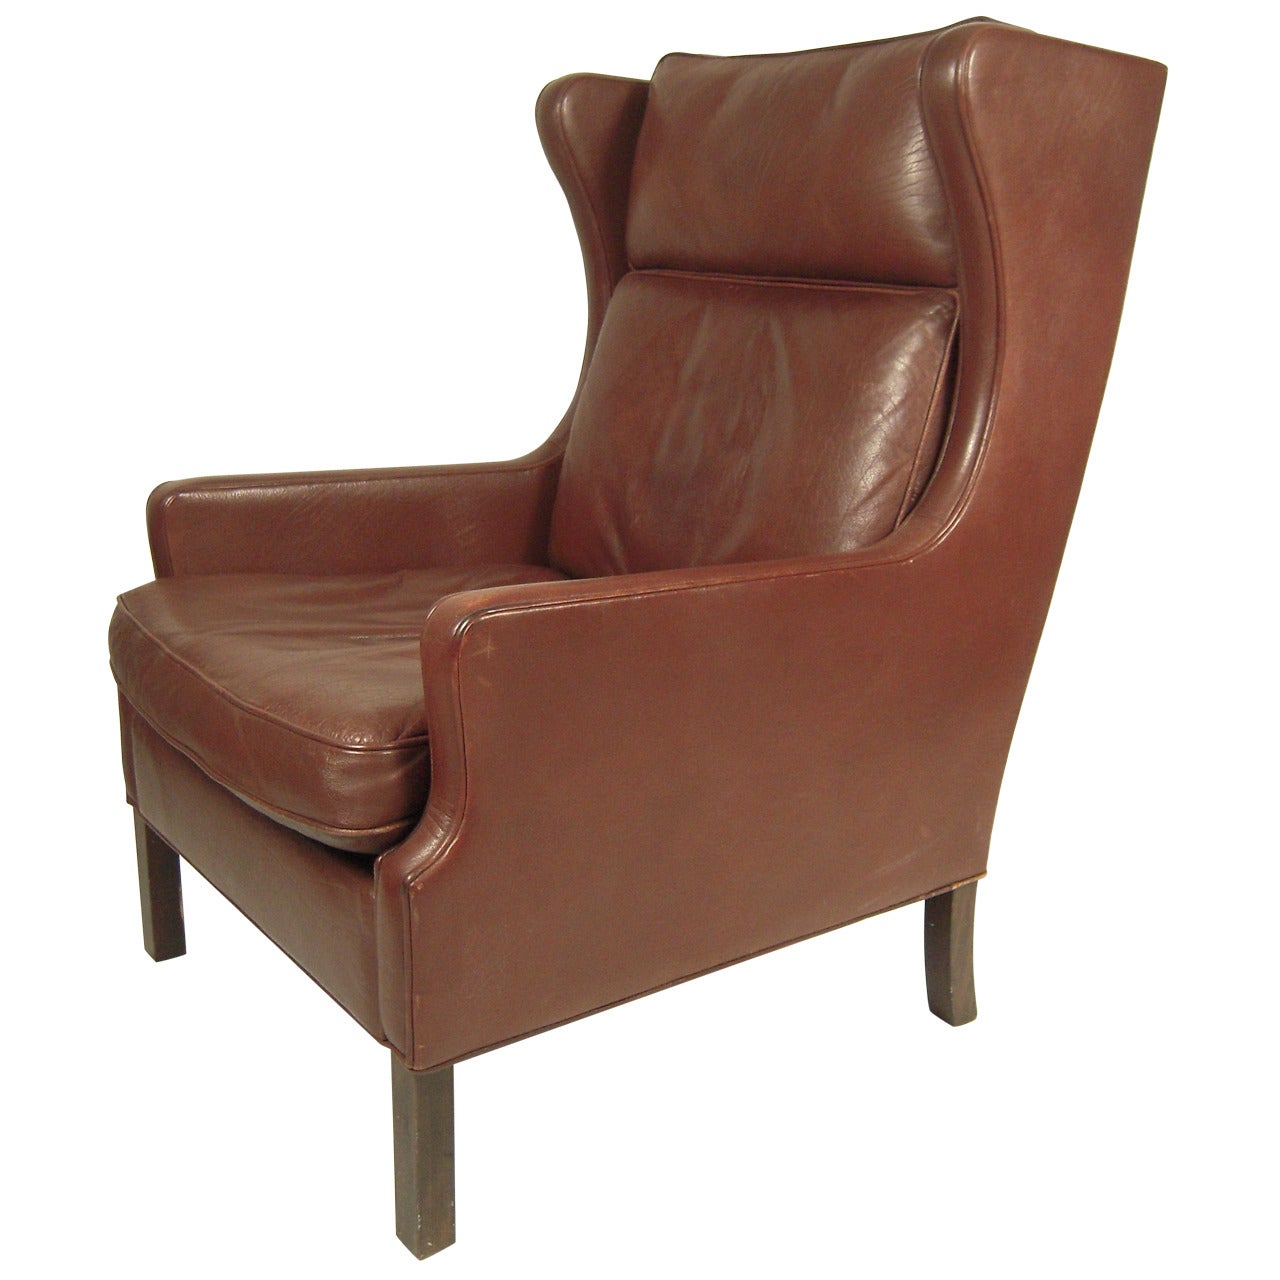 Vintage Danish Mid Century Leather Wingback Chair